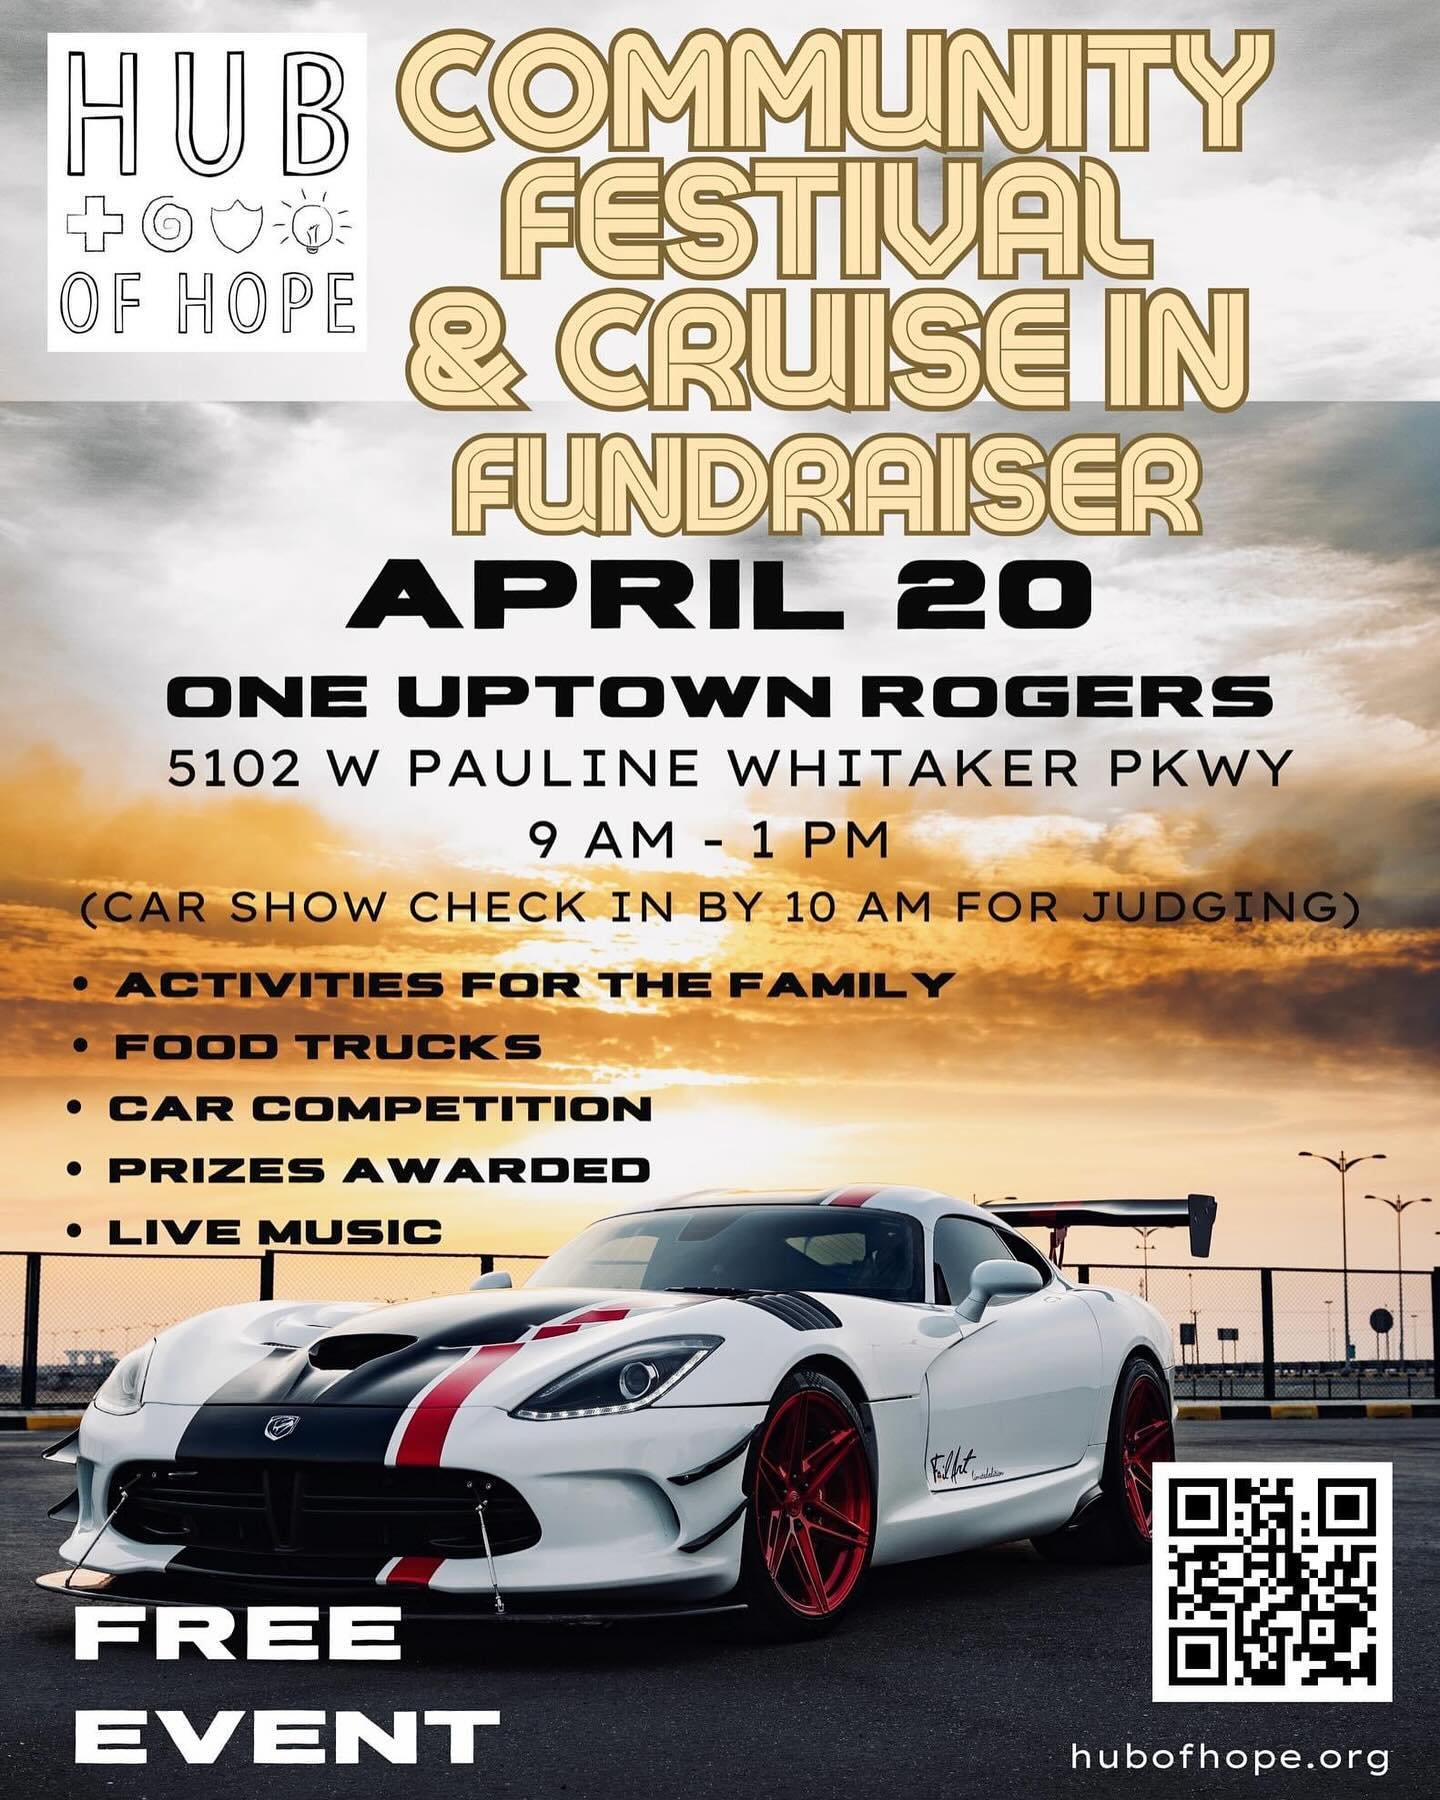 It&rsquo;s going to be a busy weekend in NWA for car enthusiasts - we are excited to be part of both of these charity events with @hubofhopenwa and @spectre.nwa !

#expressrally #driversonly #hubofhope #spectrenwa #carcommunity #northwestarkansas